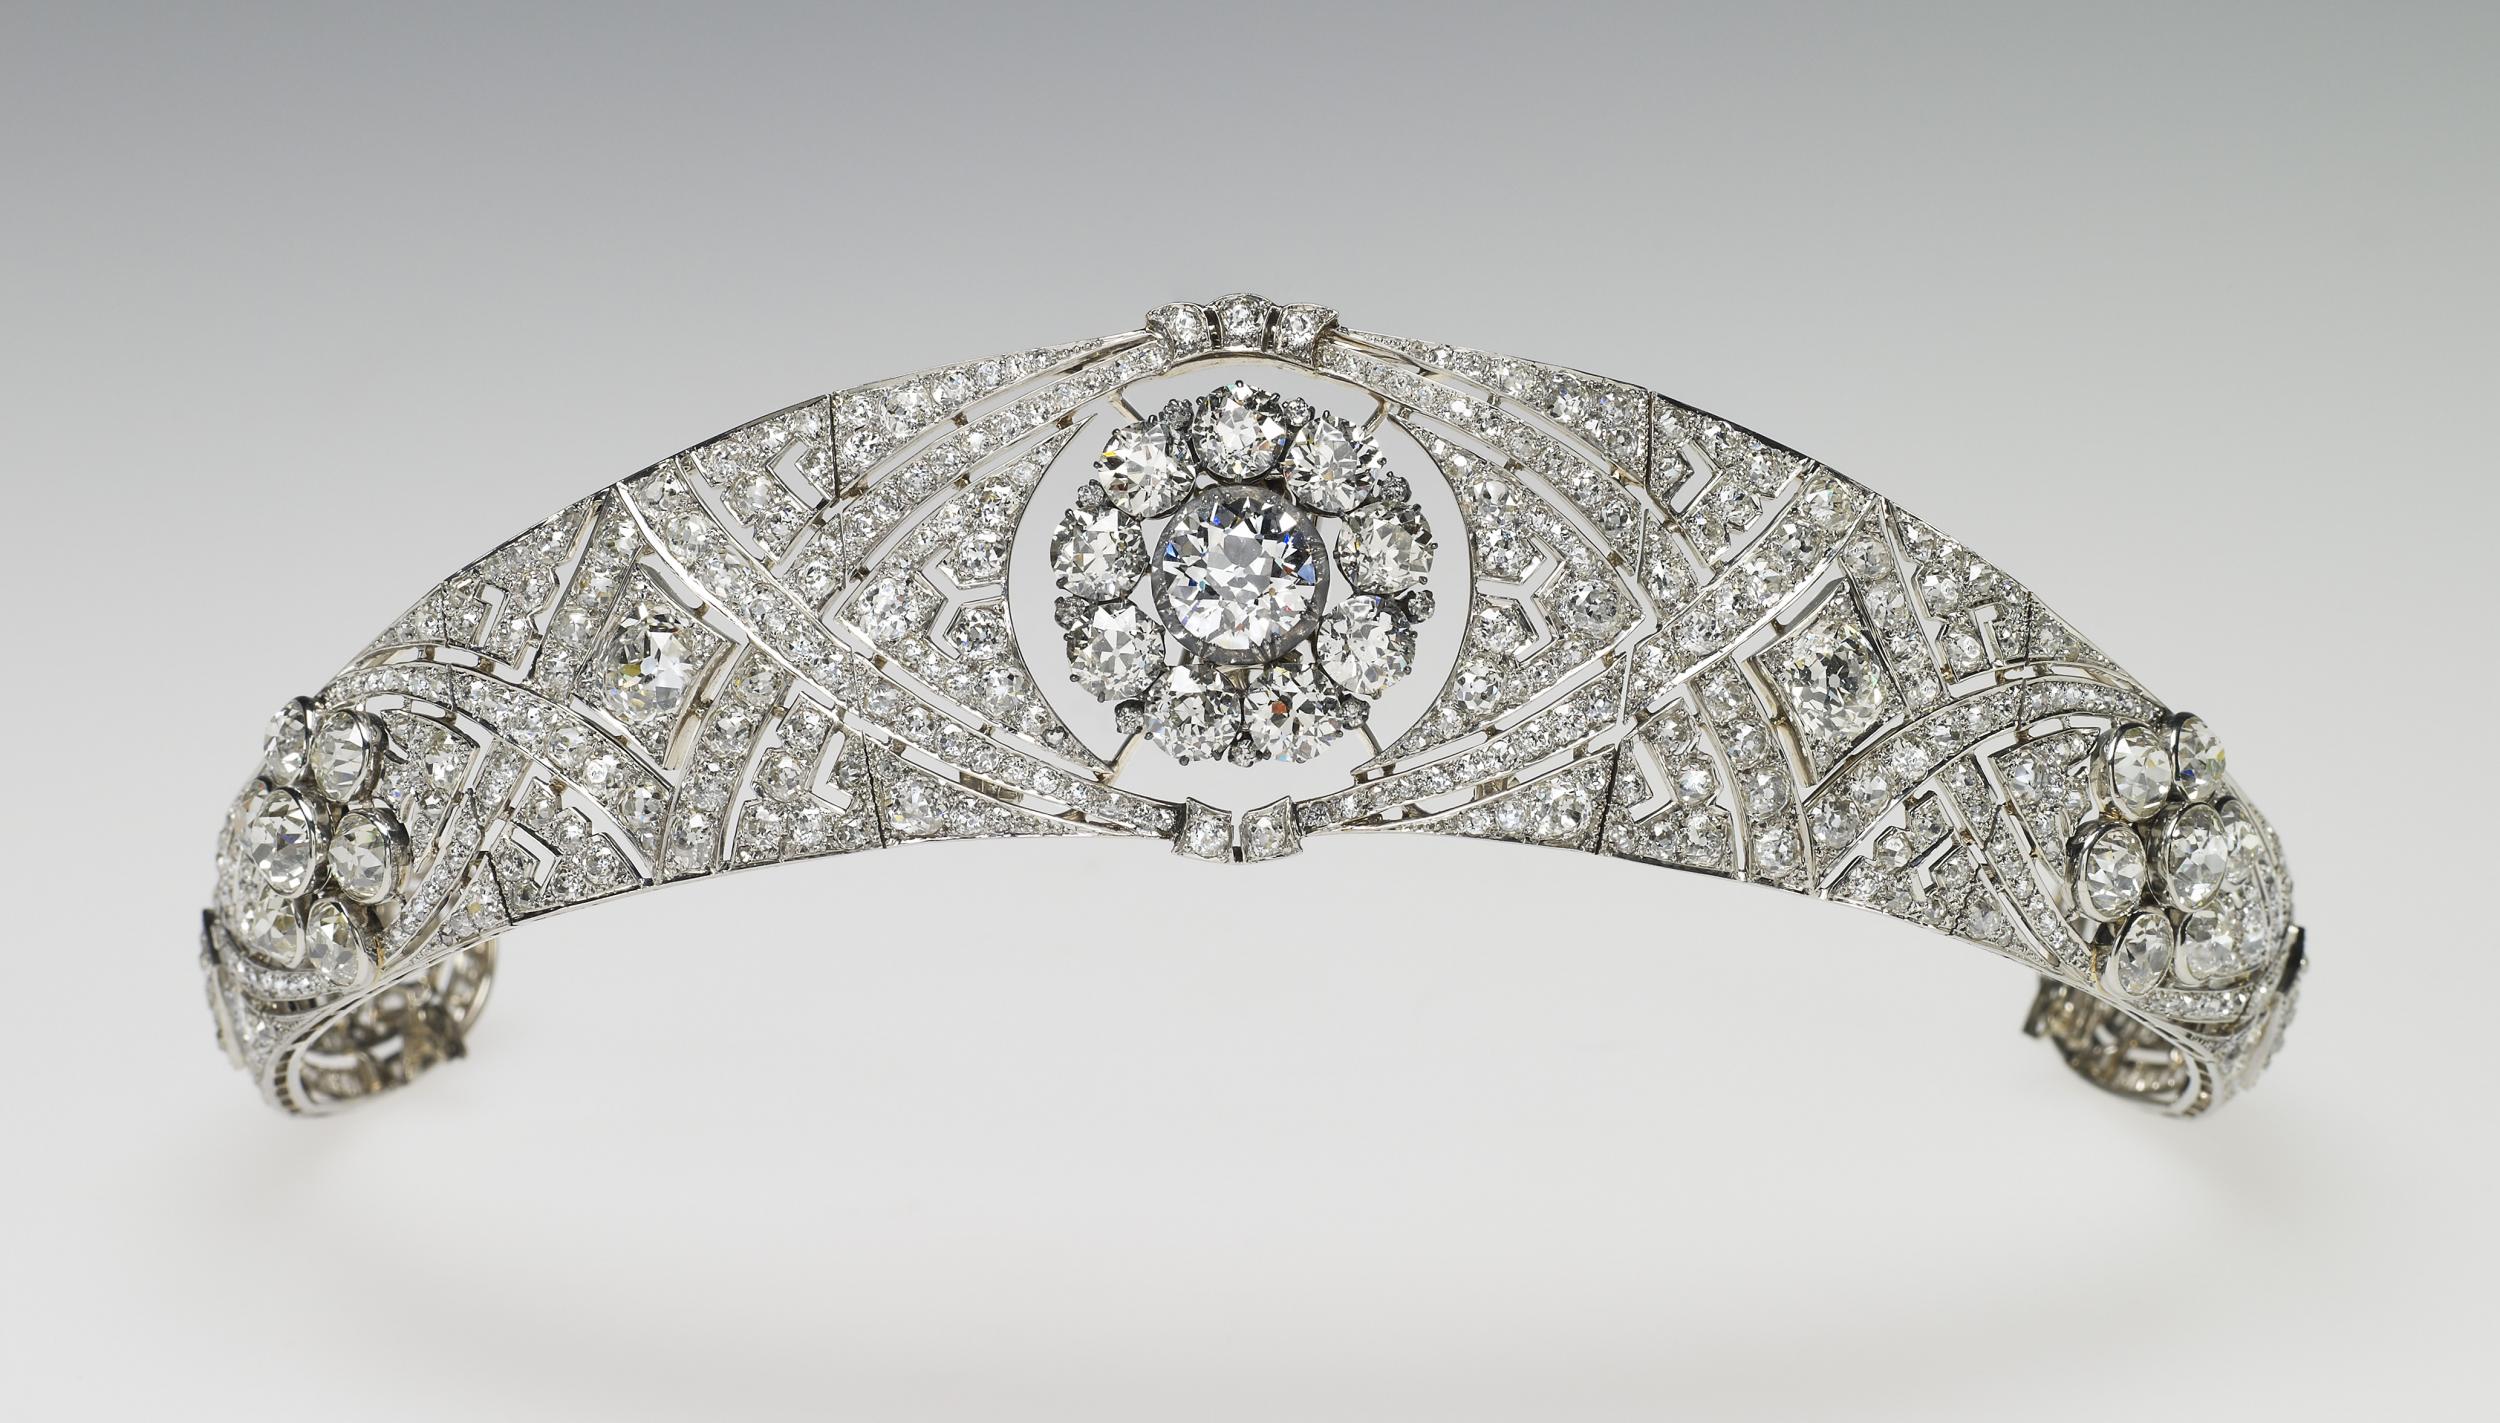 The diamond and platinum bandeau tiara lent to The Duchess of Sussex by Her Majesty The Queen